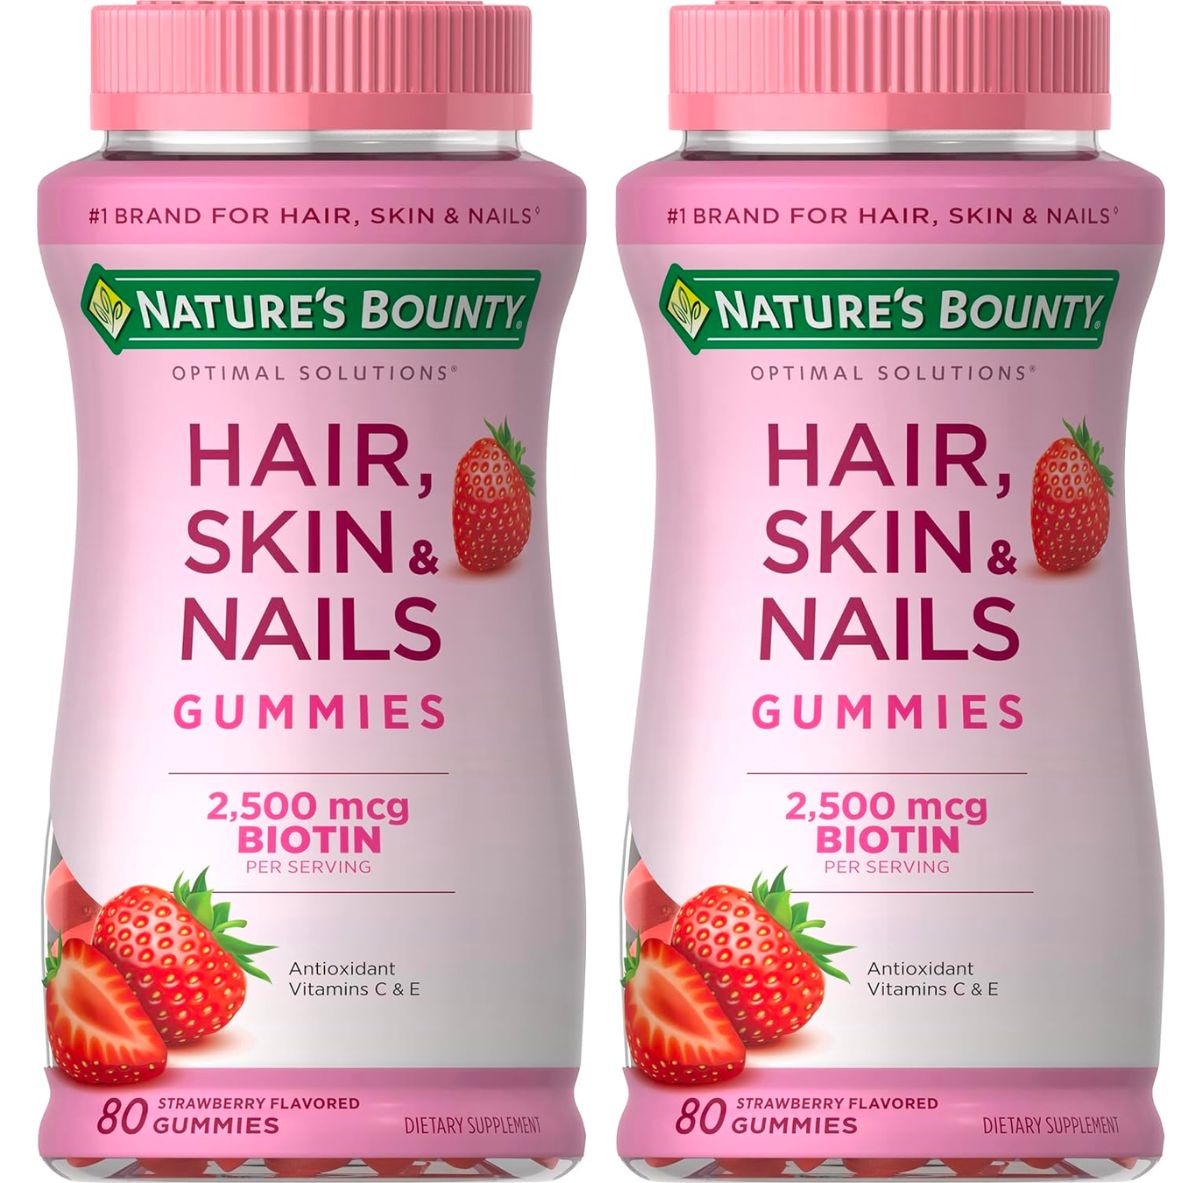 hair skin & nails supplements on a white background stock image